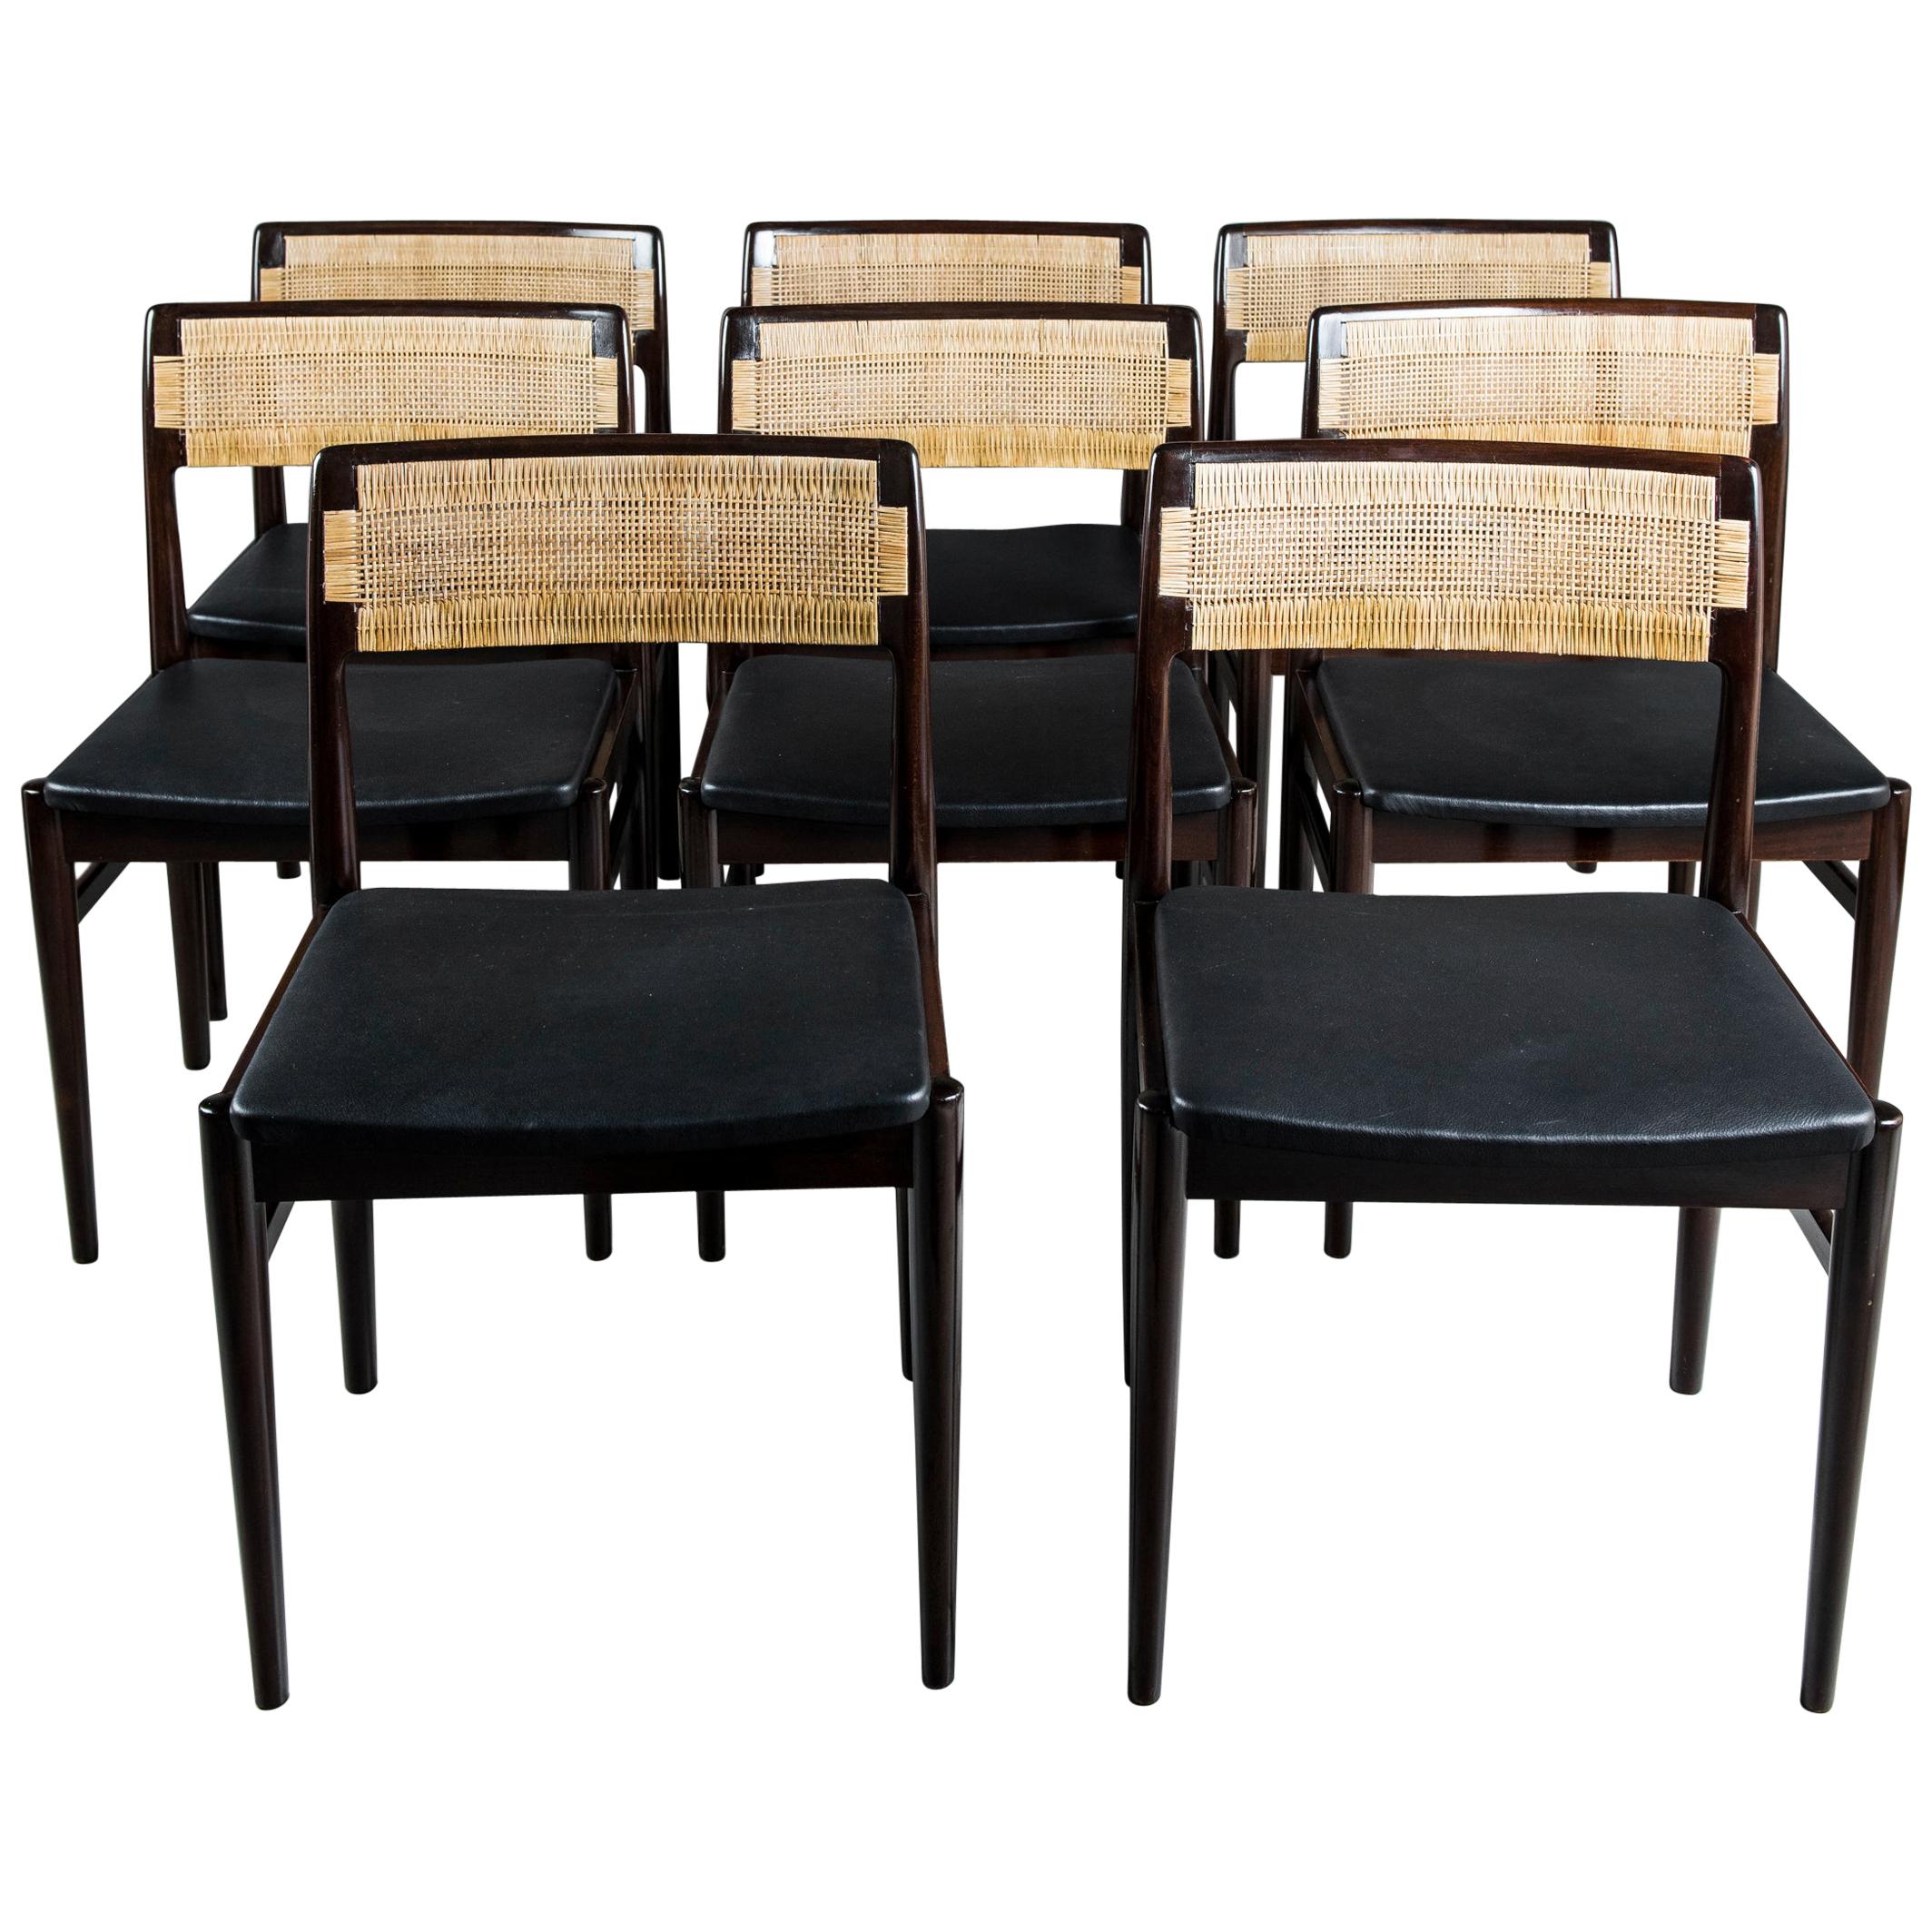 Set of Eight Dining Room Chairs Design by Erik Worts, Denmark, circa 1960.